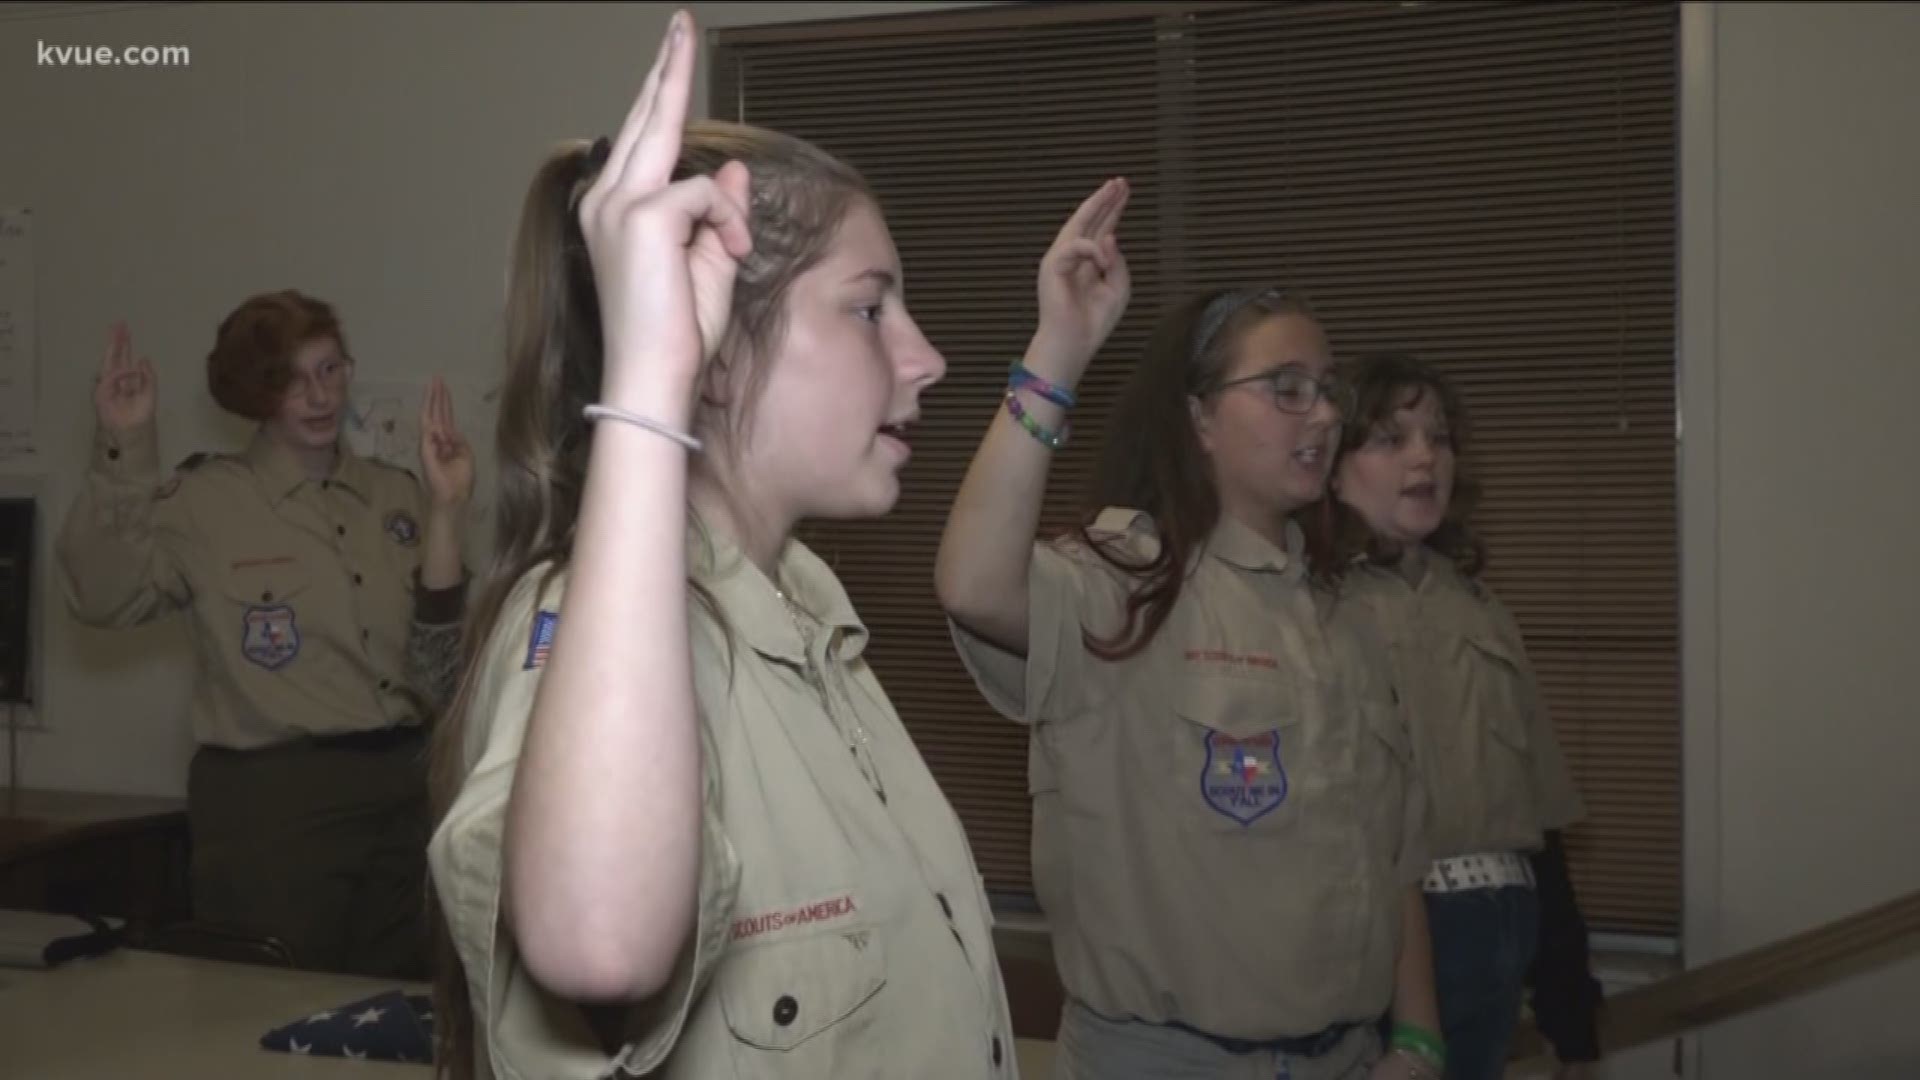 For the first time in its 109-year history, the Boy Scouts of America started welcoming girls this month. Kalyn Norwood introduced us to the first all-girl Boy Scout troop in Elgin.